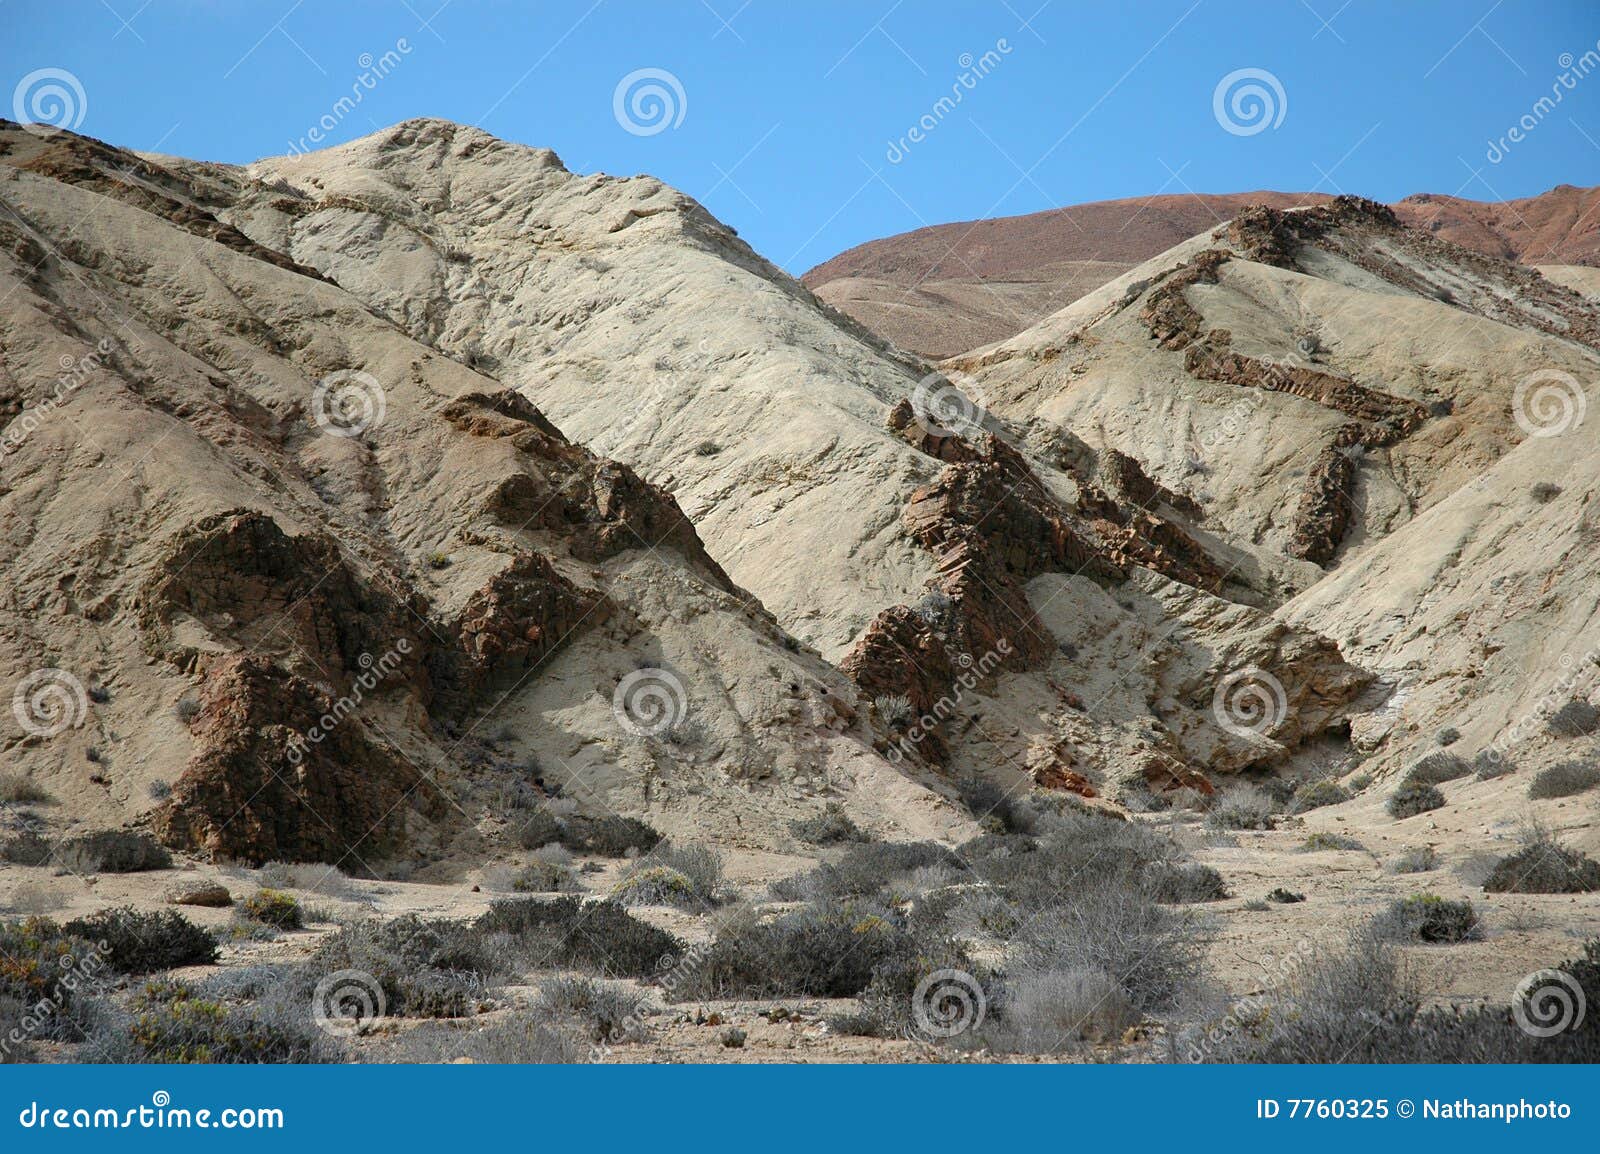 snaking geological formation of chile